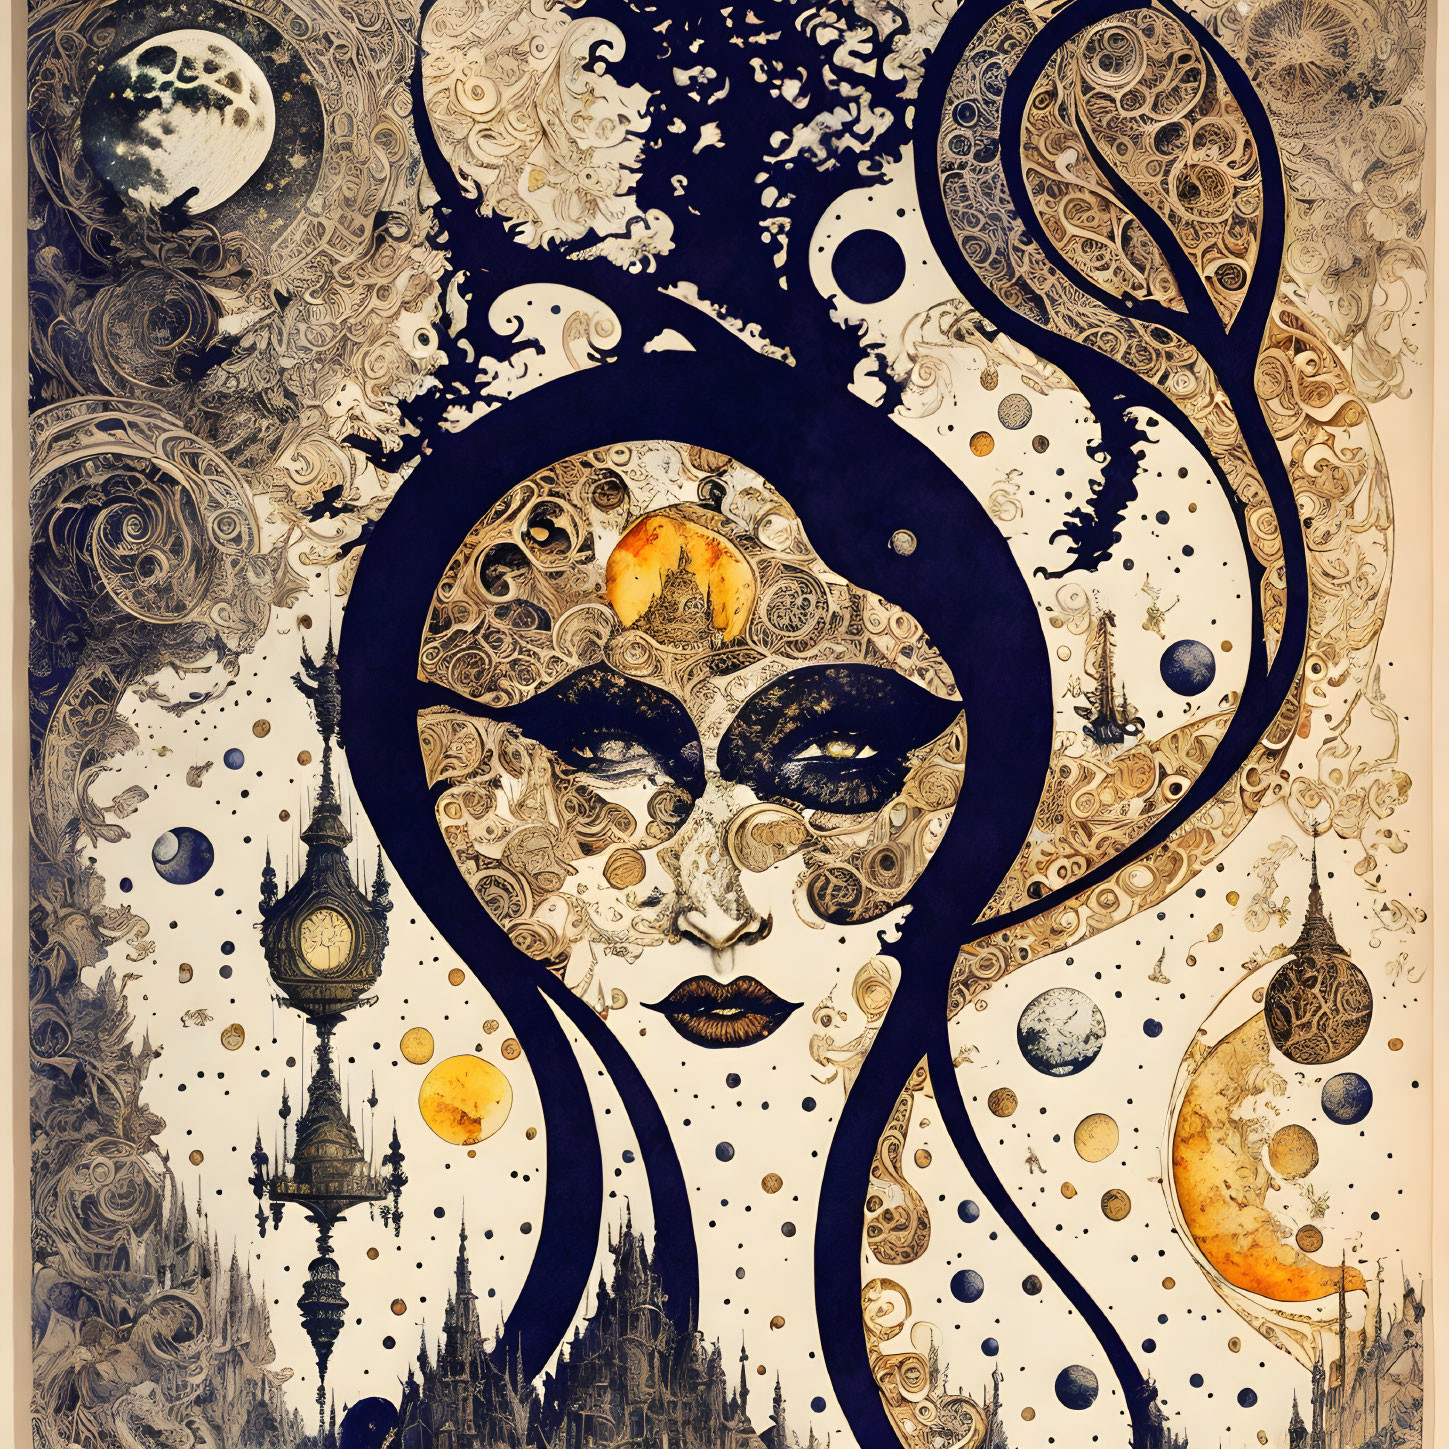 Celestial-themed artwork: Woman's silhouette adorned with moons, stars, and ornate designs